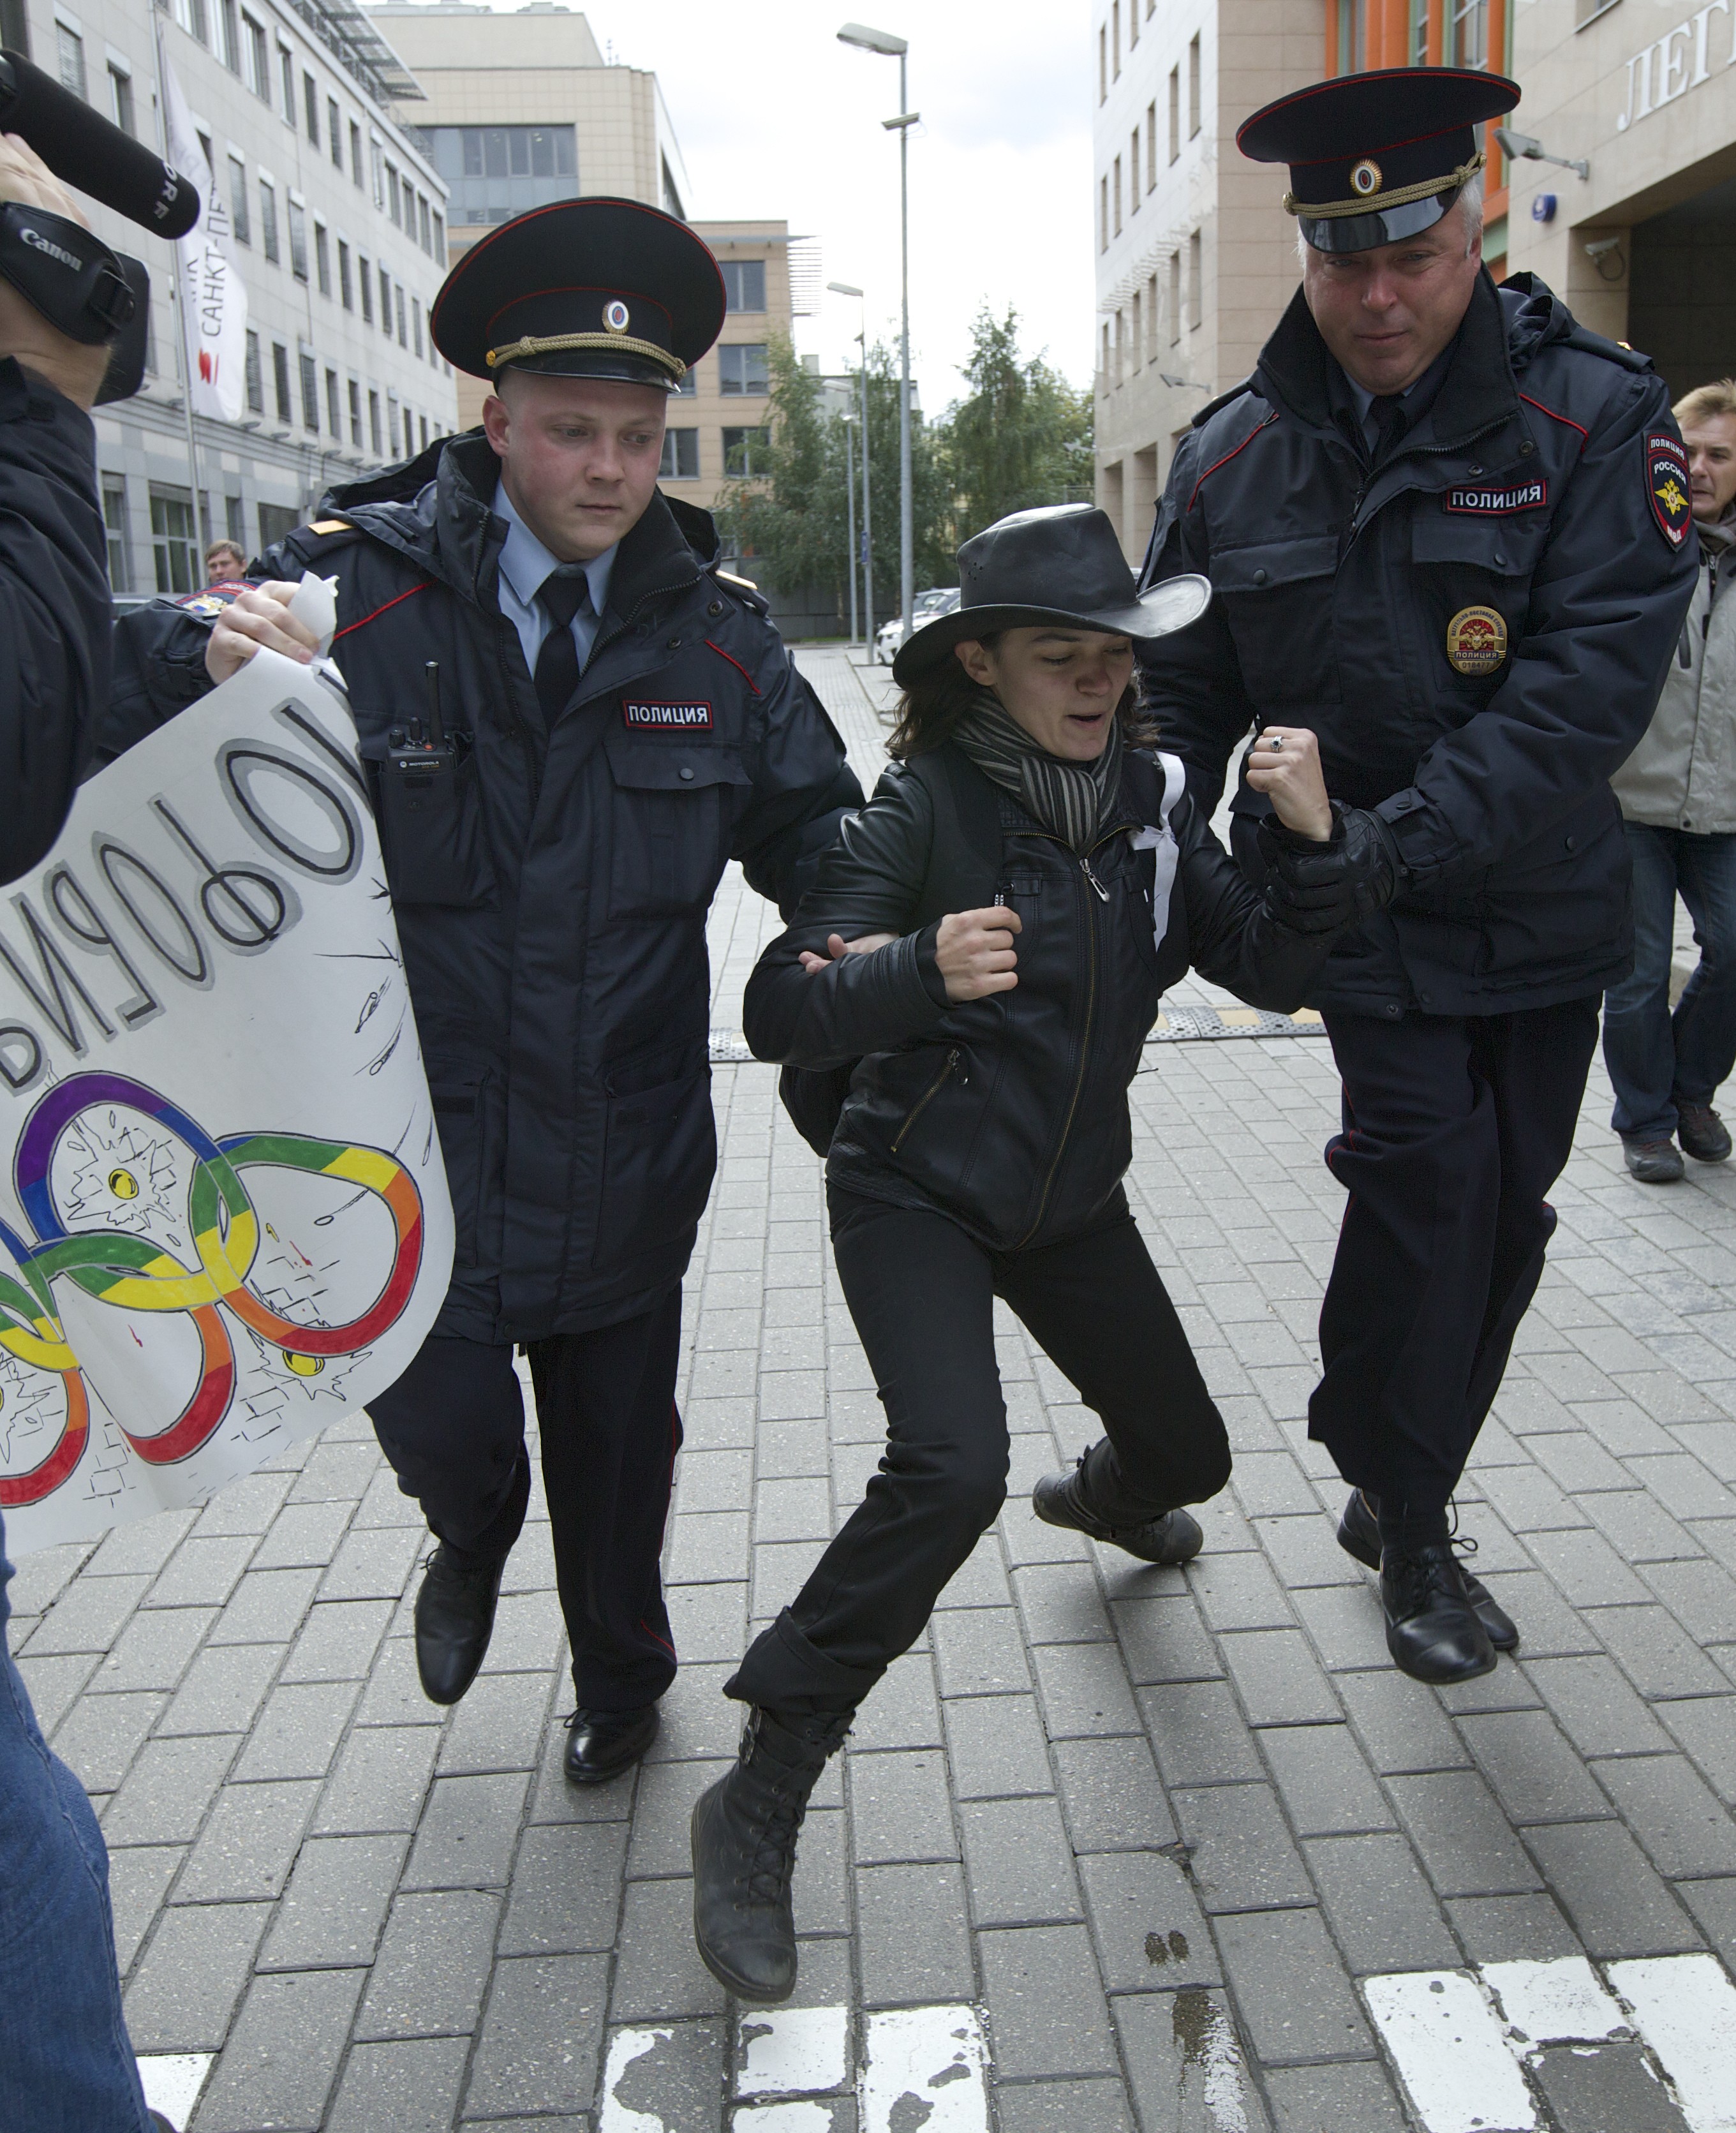 25 September 2013, Russia. Police arrest an LGBT rights activist during a protest outside the Sochi 2014 Winter Olympic Games Organising Committee office in Moscow.